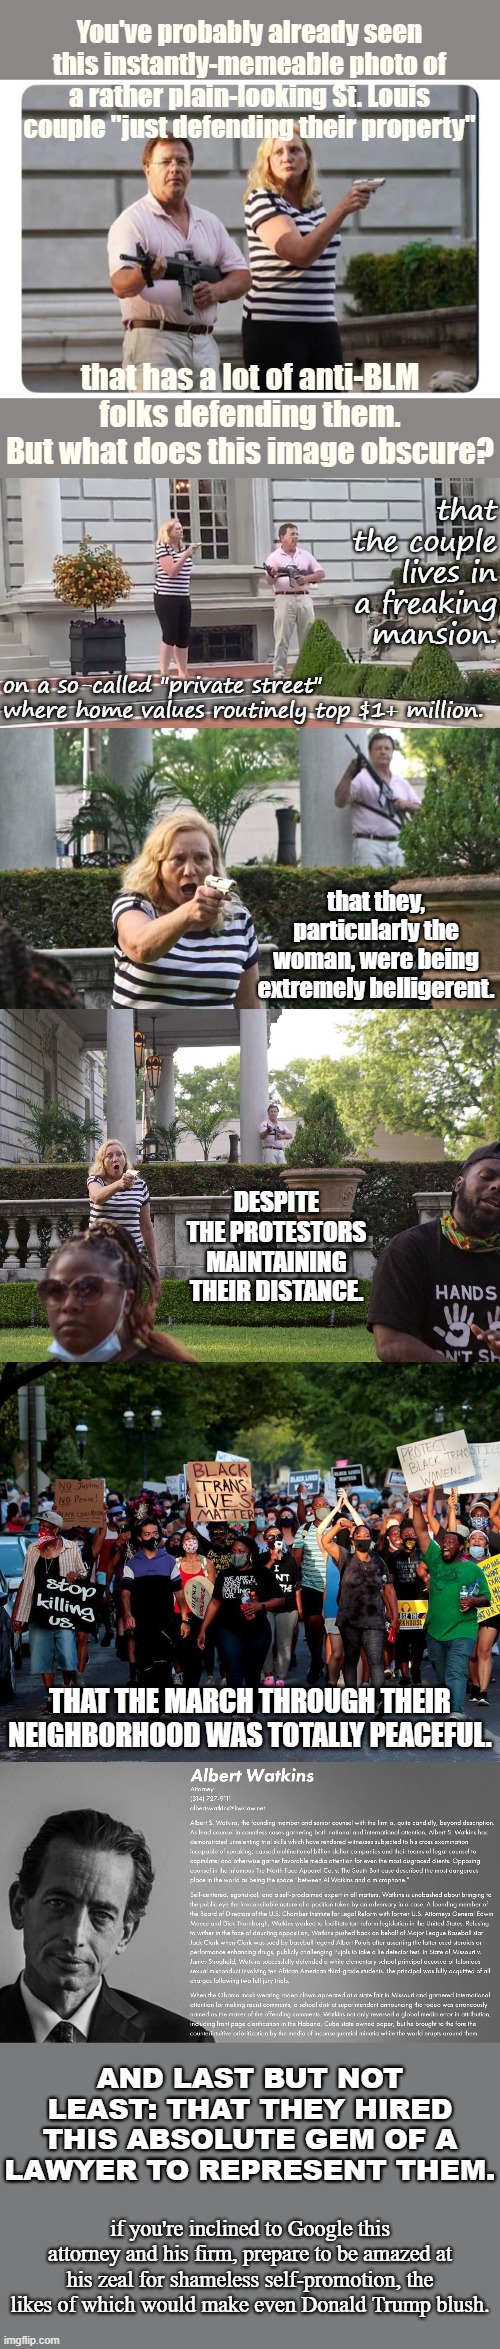 The story behind this already-classic meme. | You've probably already seen this instantly-memeable photo of a rather plain-looking St. Louis couple "just defending their property"; that has a lot of anti-BLM folks defending them. But what does this image obscure? that the couple lives in a freaking mansion. on a so-called "private street" where home values routinely top $1+ million. that they, particularly the woman, were being extremely belligerent. DESPITE THE PROTESTORS MAINTAINING THEIR DISTANCE. THAT THE MARCH THROUGH THEIR NEIGHBORHOOD WAS TOTALLY PEACEFUL. AND LAST BUT NOT LEAST: THAT THEY HIRED THIS ABSOLUTE GEM OF A LAWYER TO REPRESENT THEM. if you're inclined to Google this attorney and his firm, prepare to be amazed at his zeal for shameless self-promotion, the likes of which would make even Donald Trump blush. | image tagged in mccloskey,al watkins,st louis couple mccloskey,st louis couple mccloskey protest,black lives matter,memes about memes | made w/ Imgflip meme maker